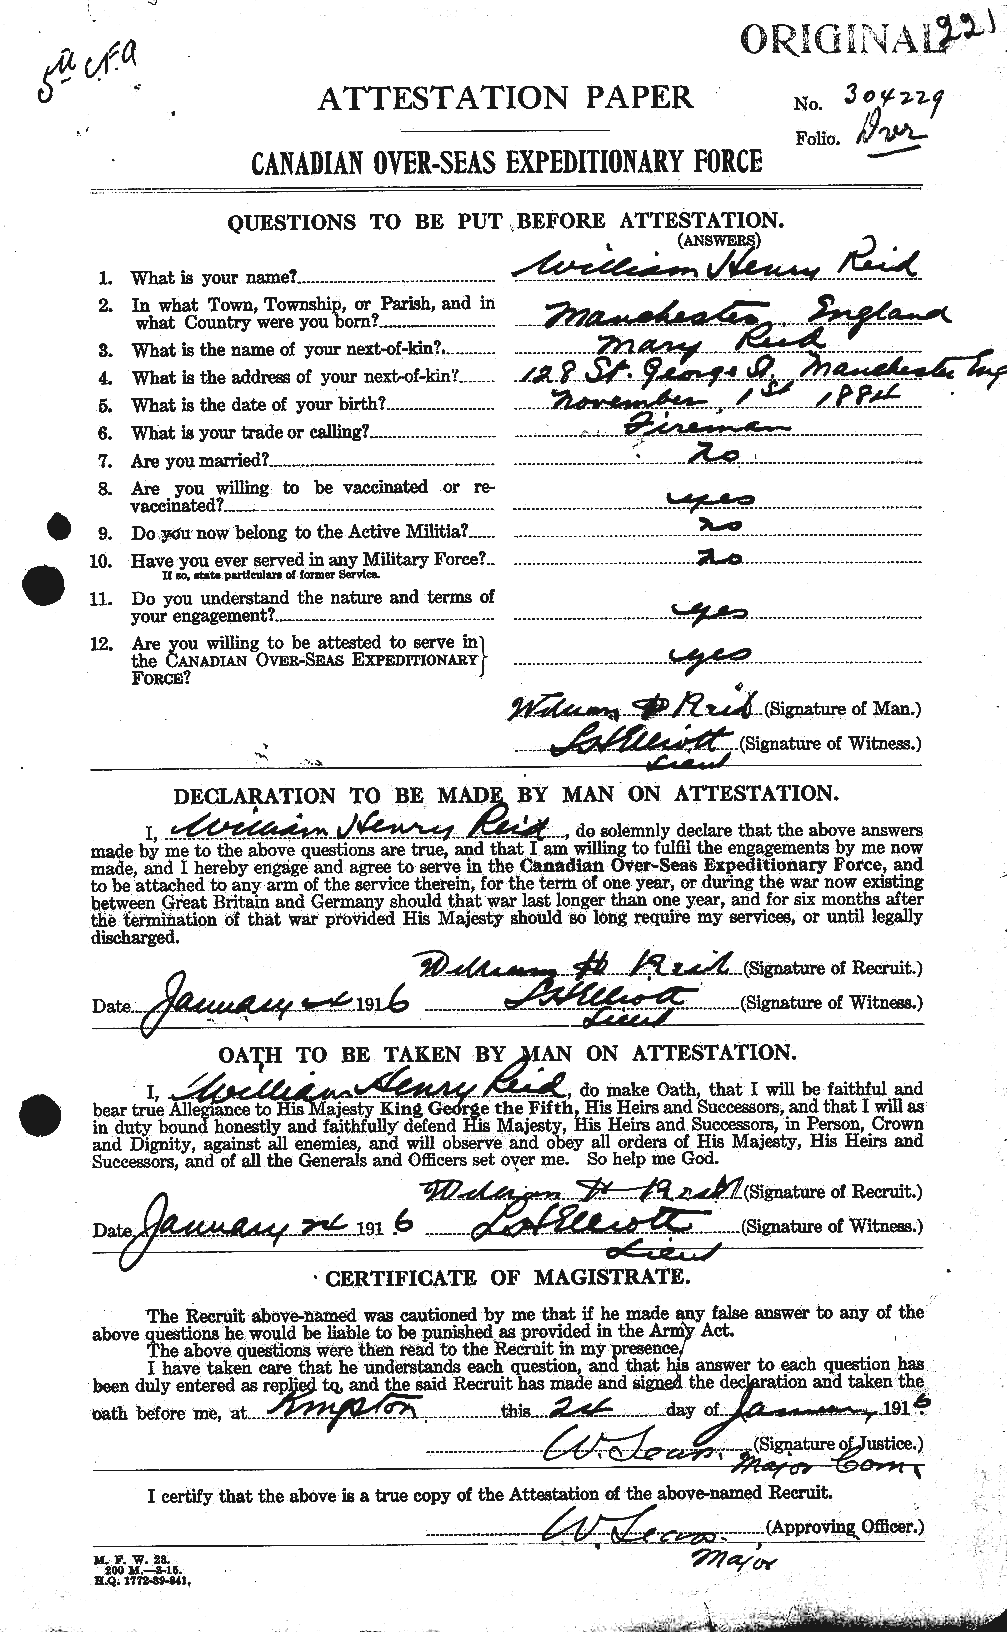 Personnel Records of the First World War - CEF 596995a